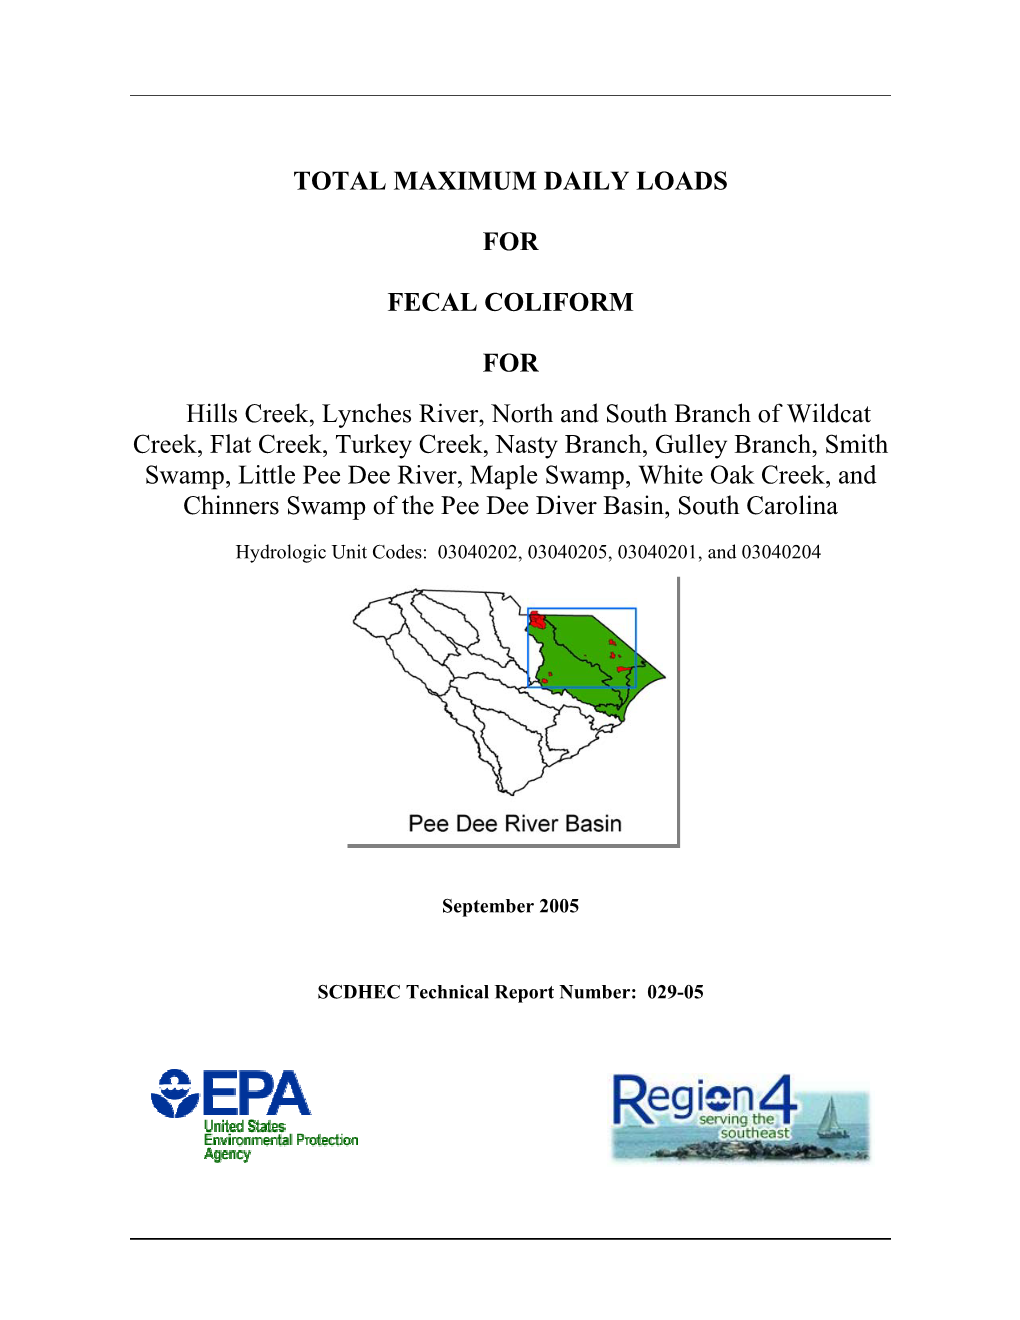 TOTAL MAXIMUM DAILY LOADS for FECAL COLIFORM for Hills